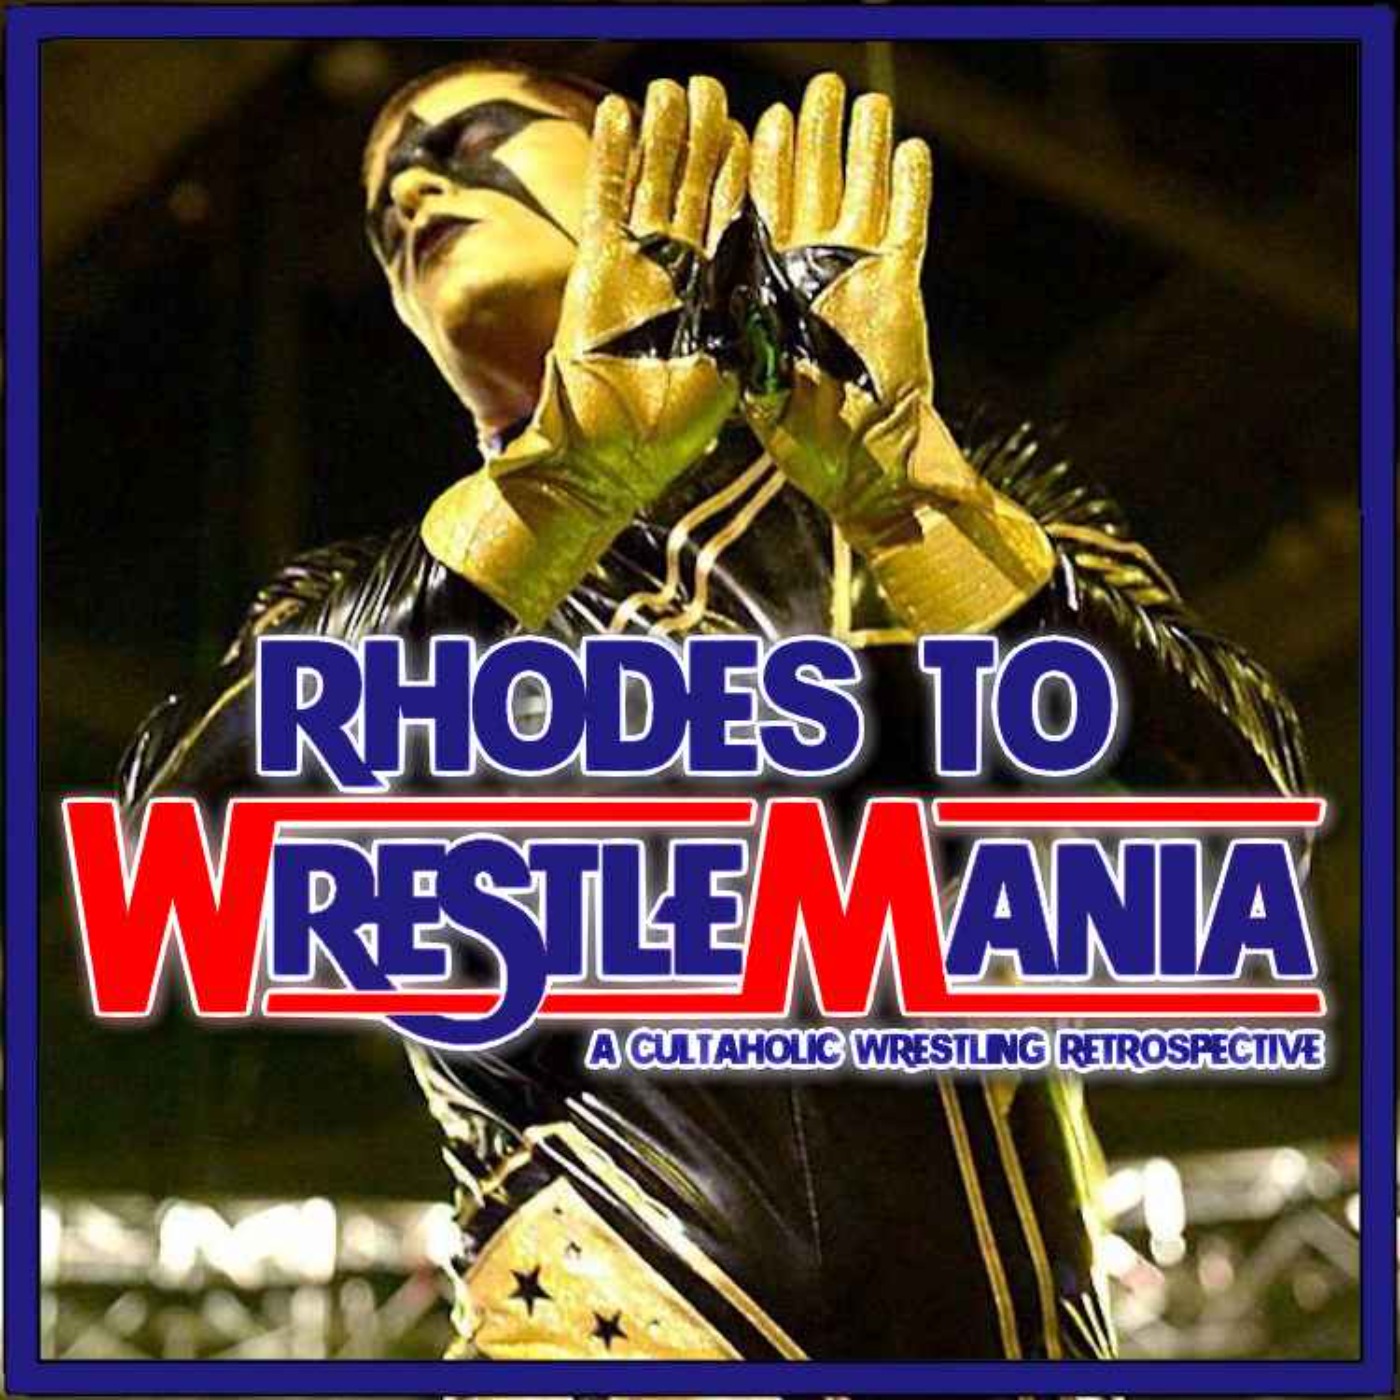 RHODES TO WRESTLEMANIA 1 - The Story Begins...